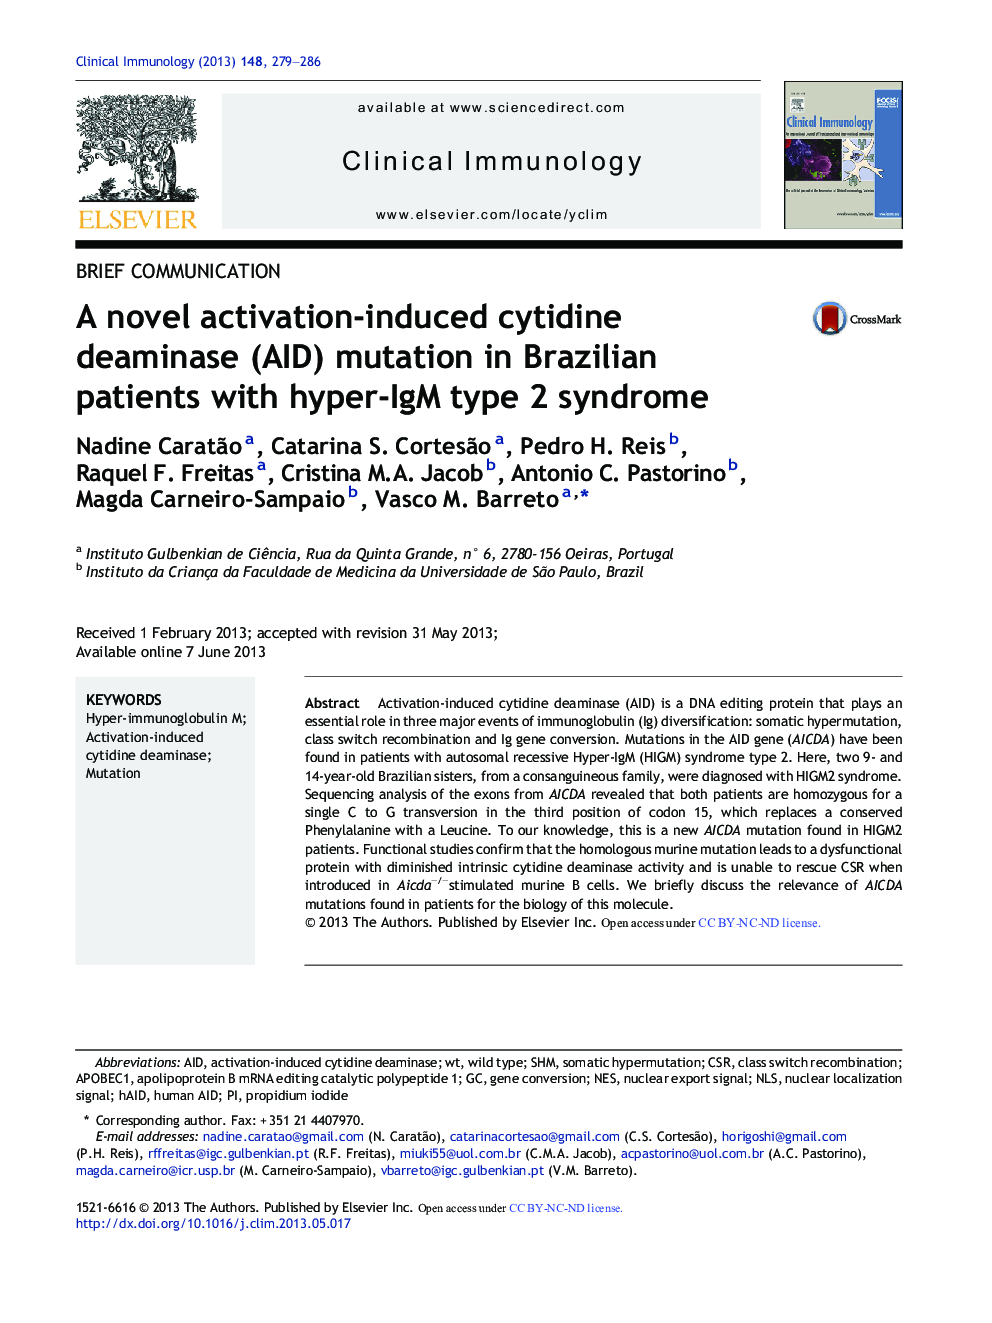 Brief CommunicationA novel activation-induced cytidine deaminase (AID) mutation in Brazilian patients with hyper-IgM type 2 syndrome